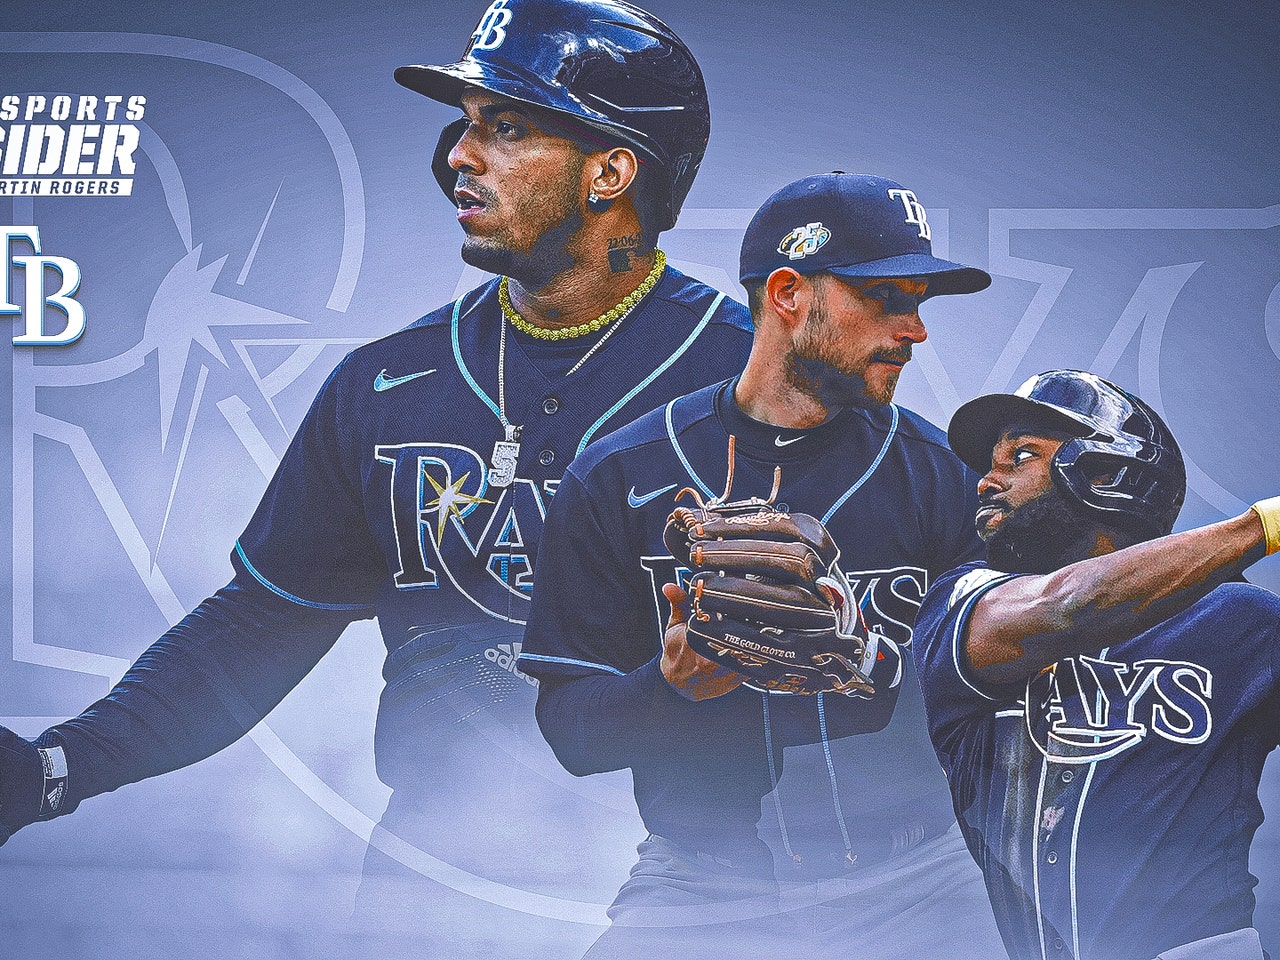 Rays make more history, accomplish feat not seen in 20 years